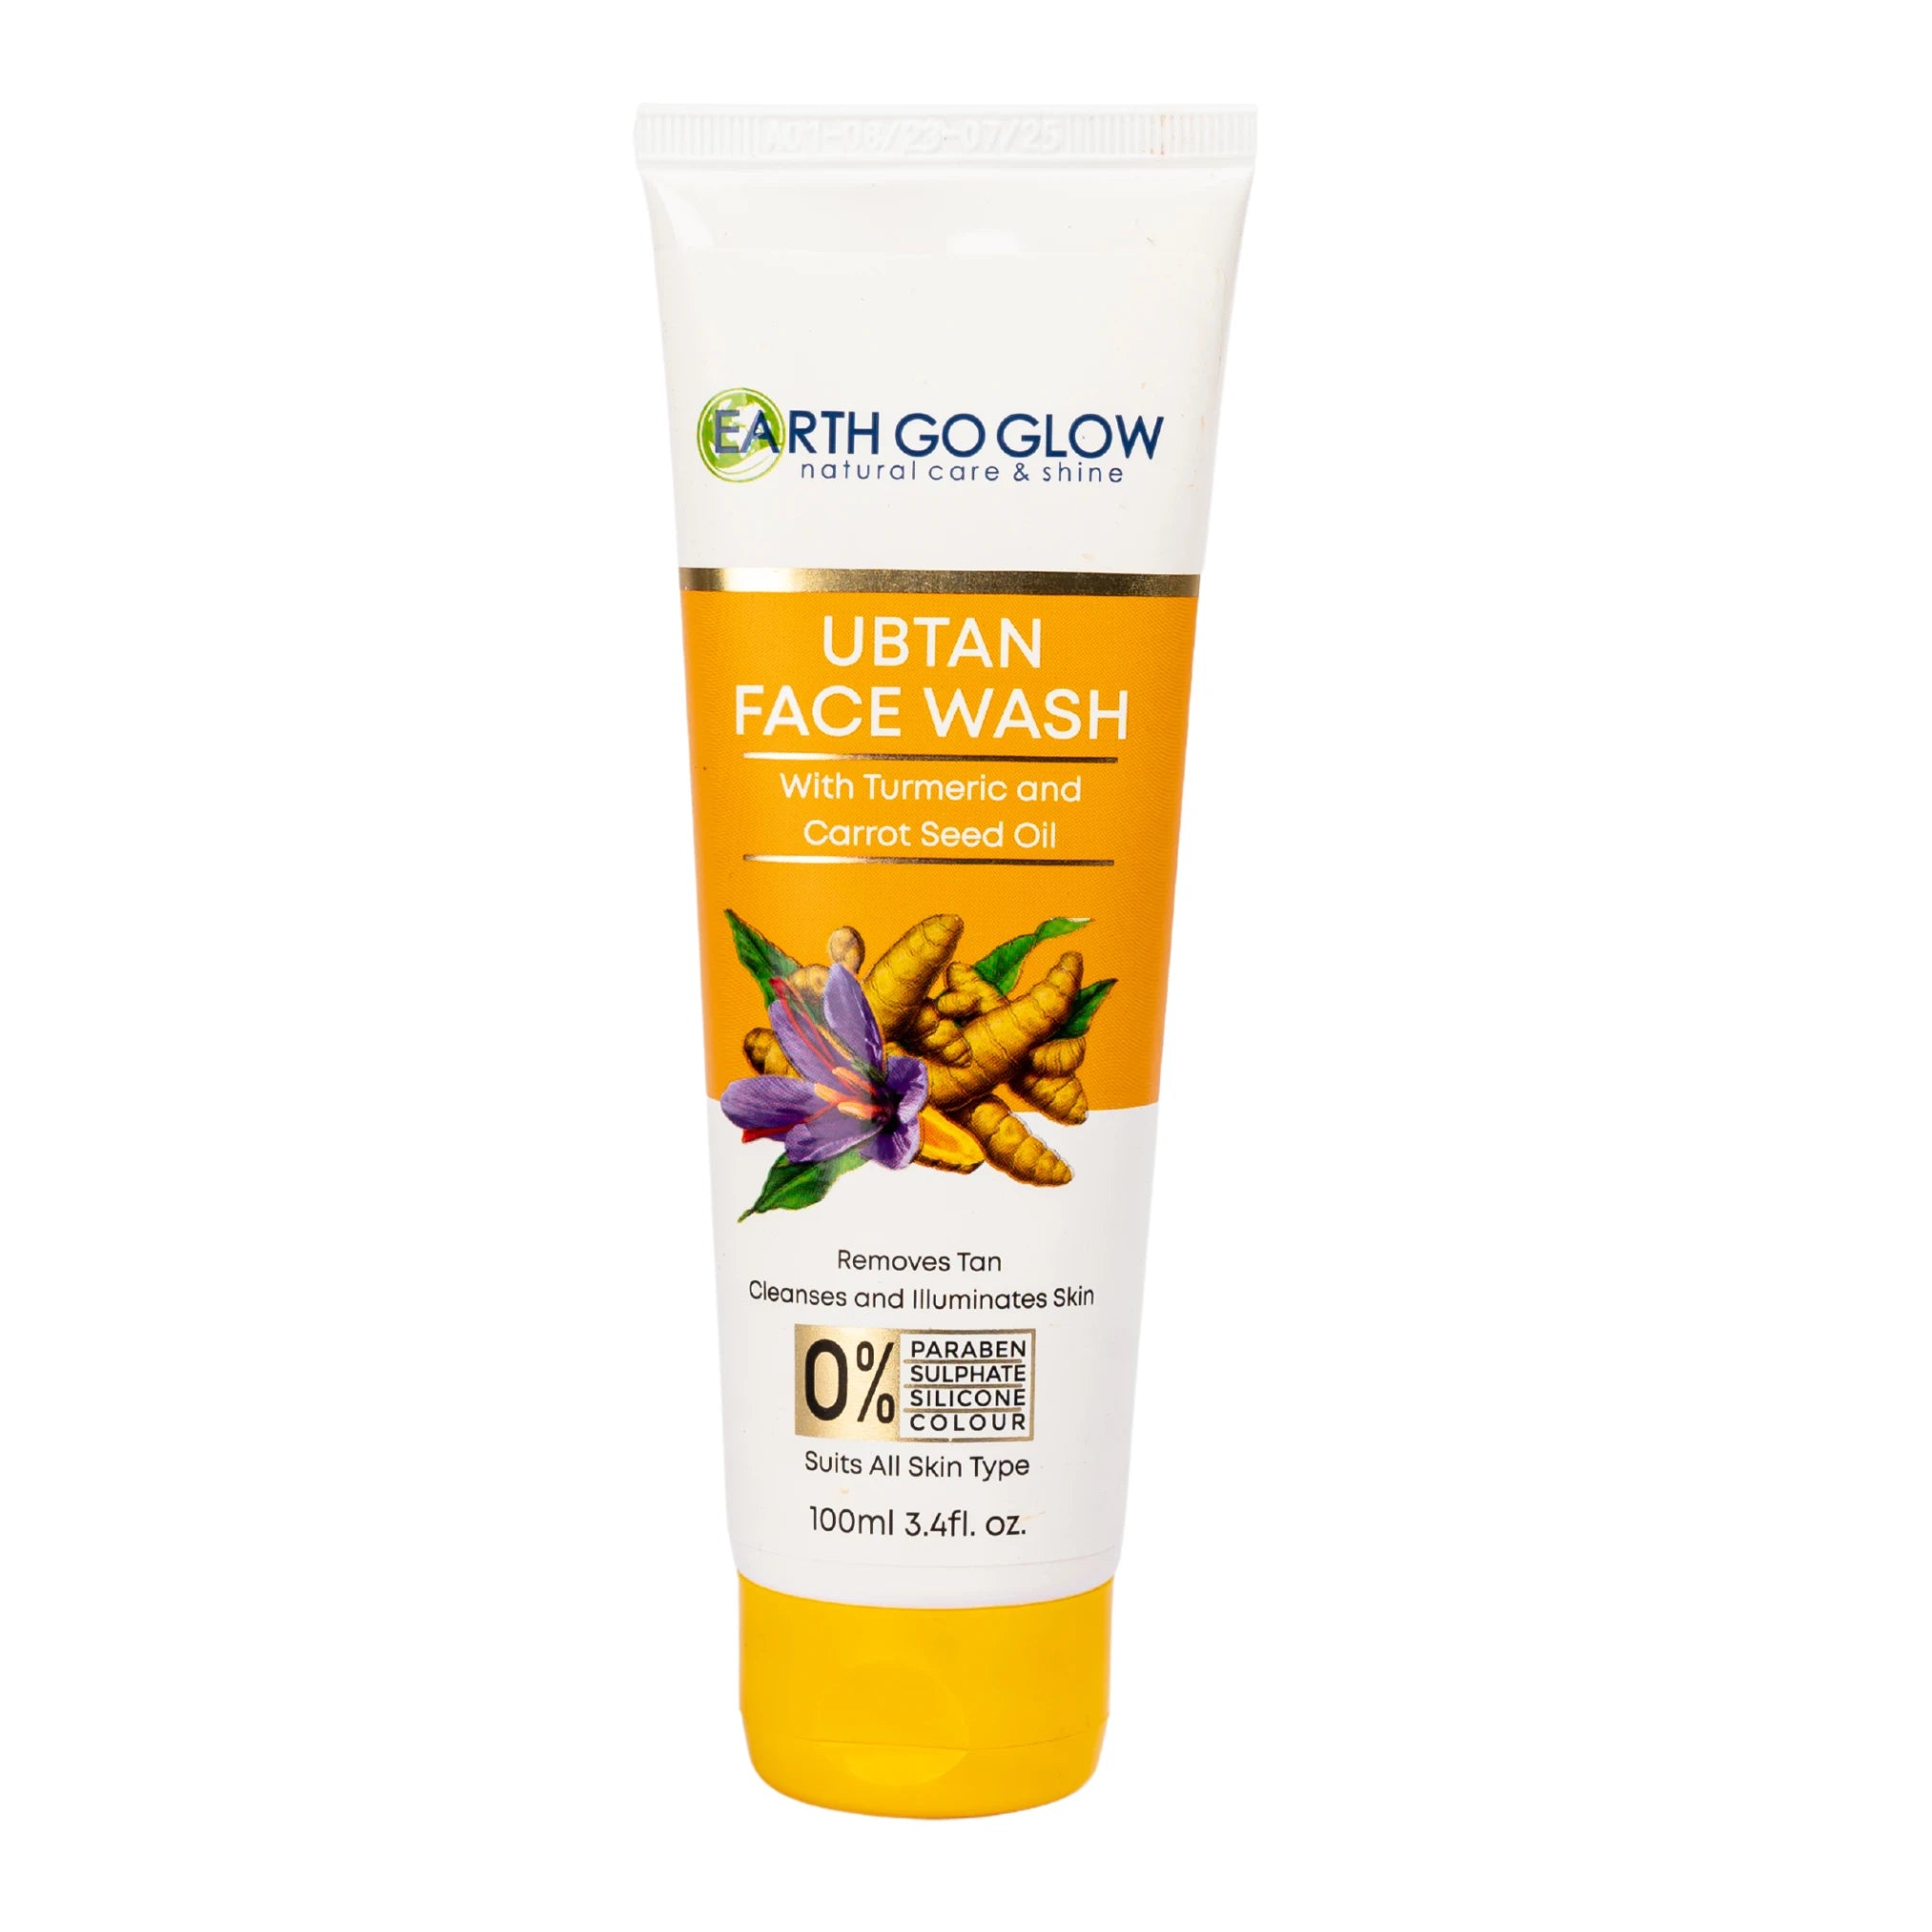 UBTAN FACE WASH WITH TURMERIC & SAFFRON FOR TAN REMOVAL 100ml